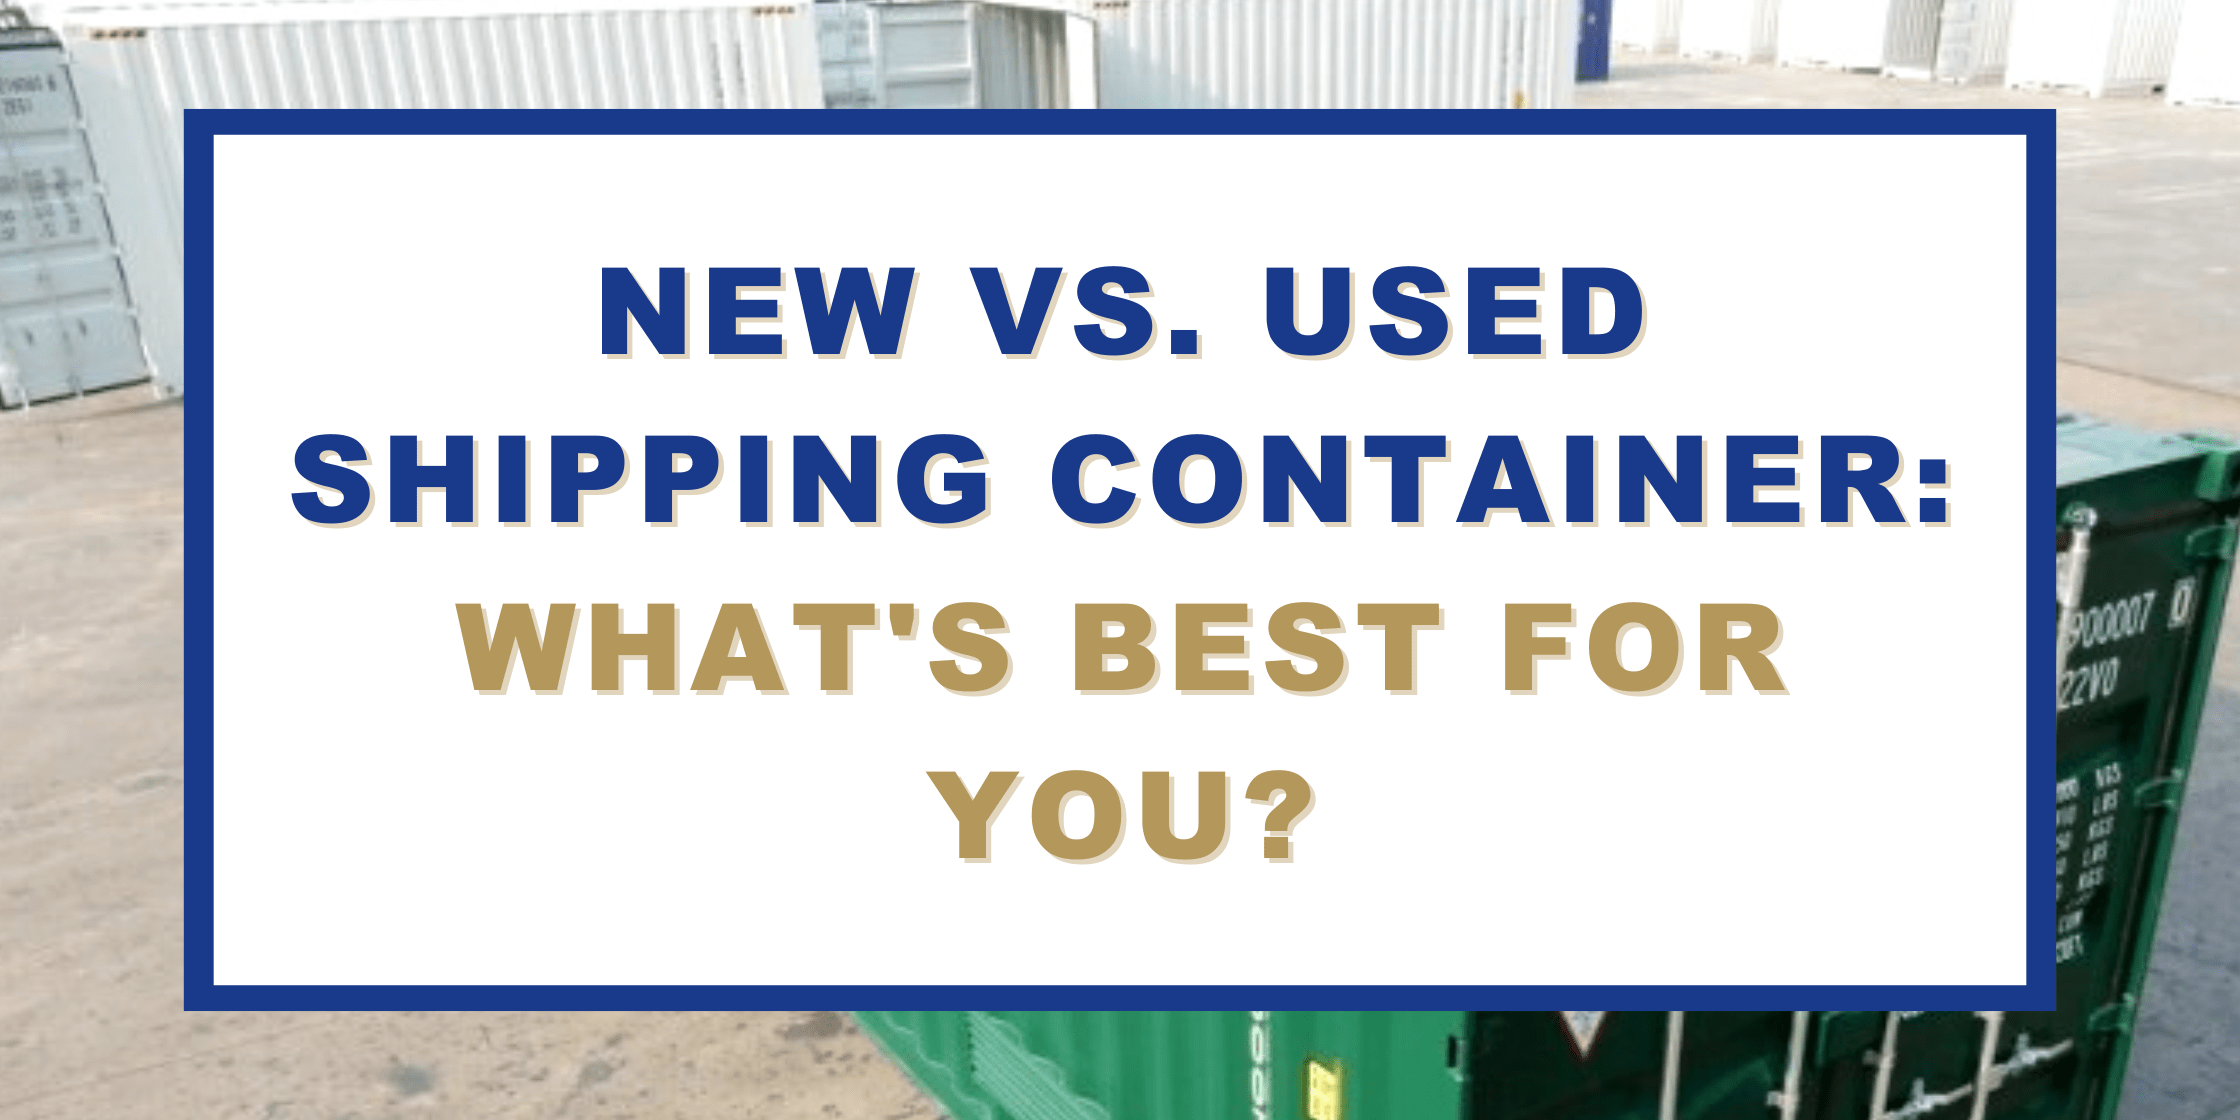 Title: New vs Used Shipping Container: what's best for you?